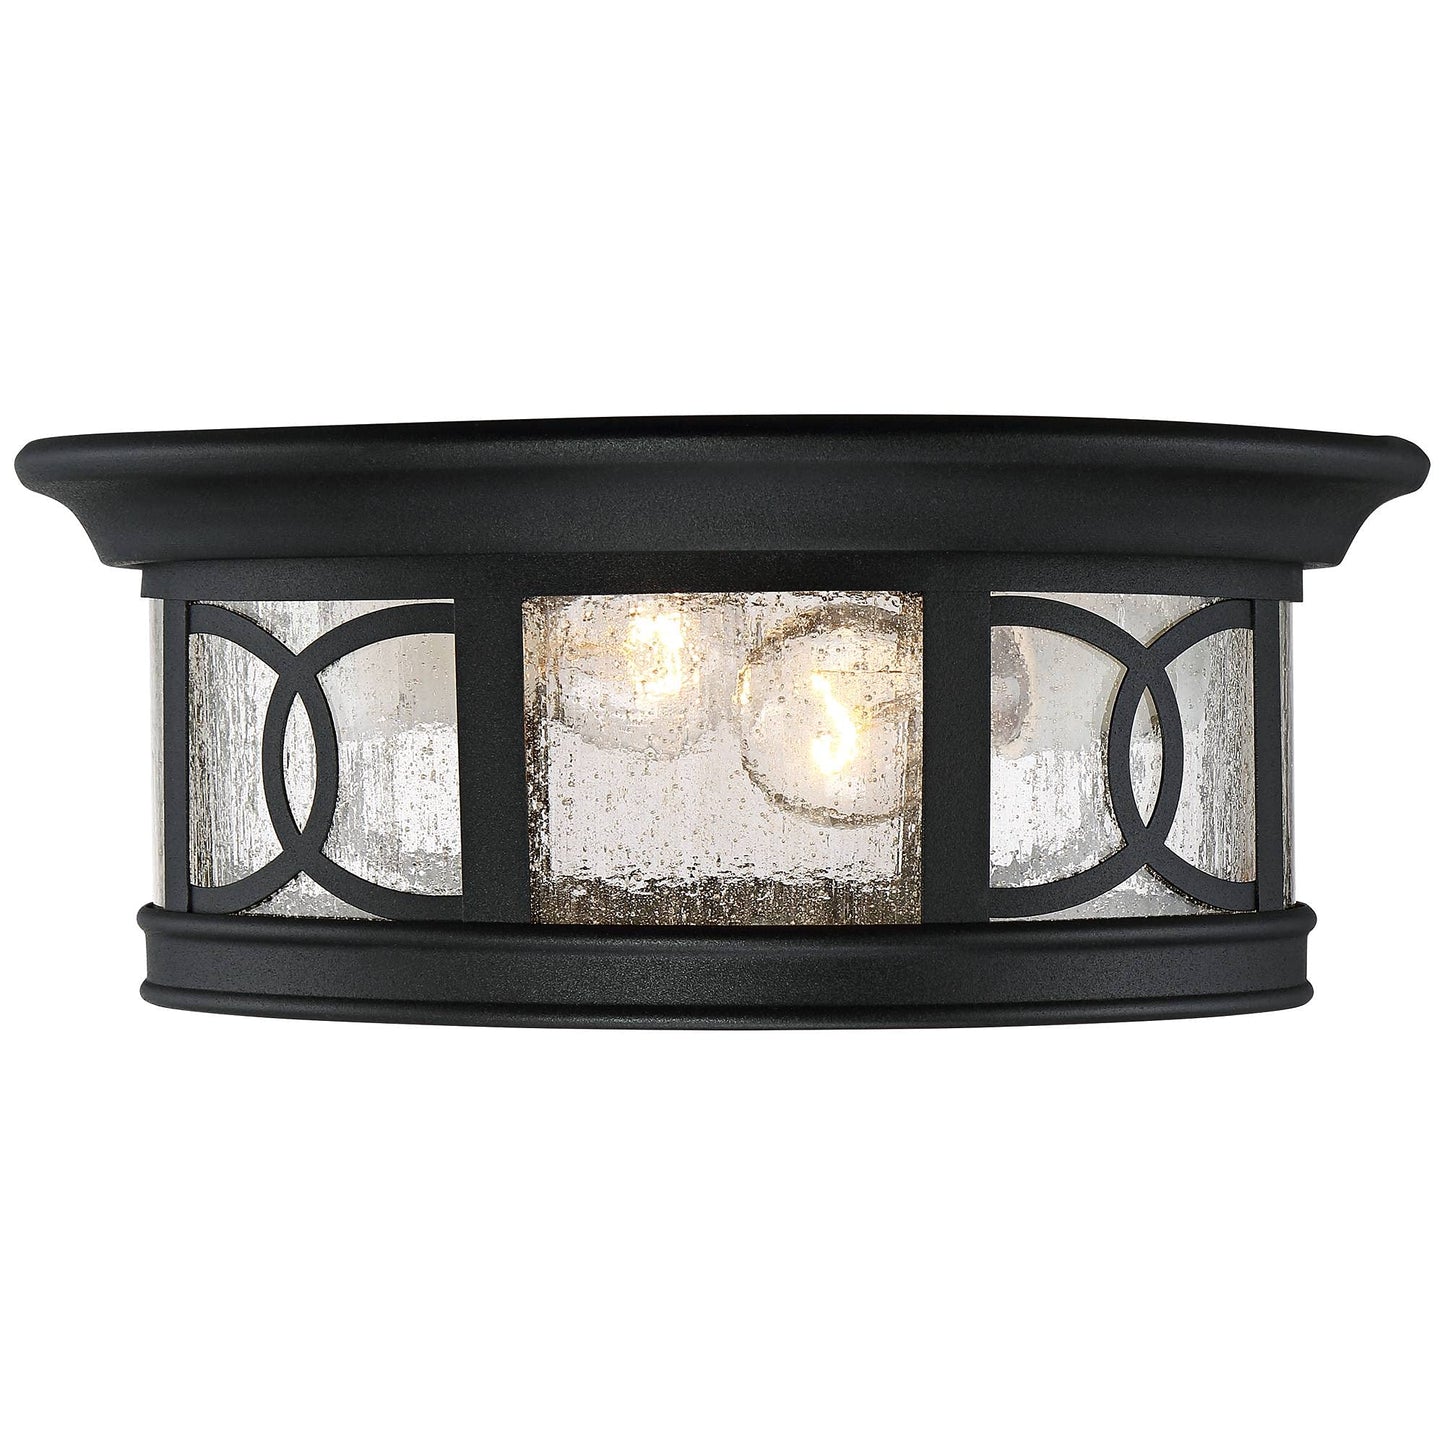 John Timberland Capistrano Mission Flush-Mount Outdoor Ceiling Light Fixture Black 12" Seedy Glass Damp Rated for Exterior House Porch Patio Outside Deck Garage Front Door Garden Home Gazebo